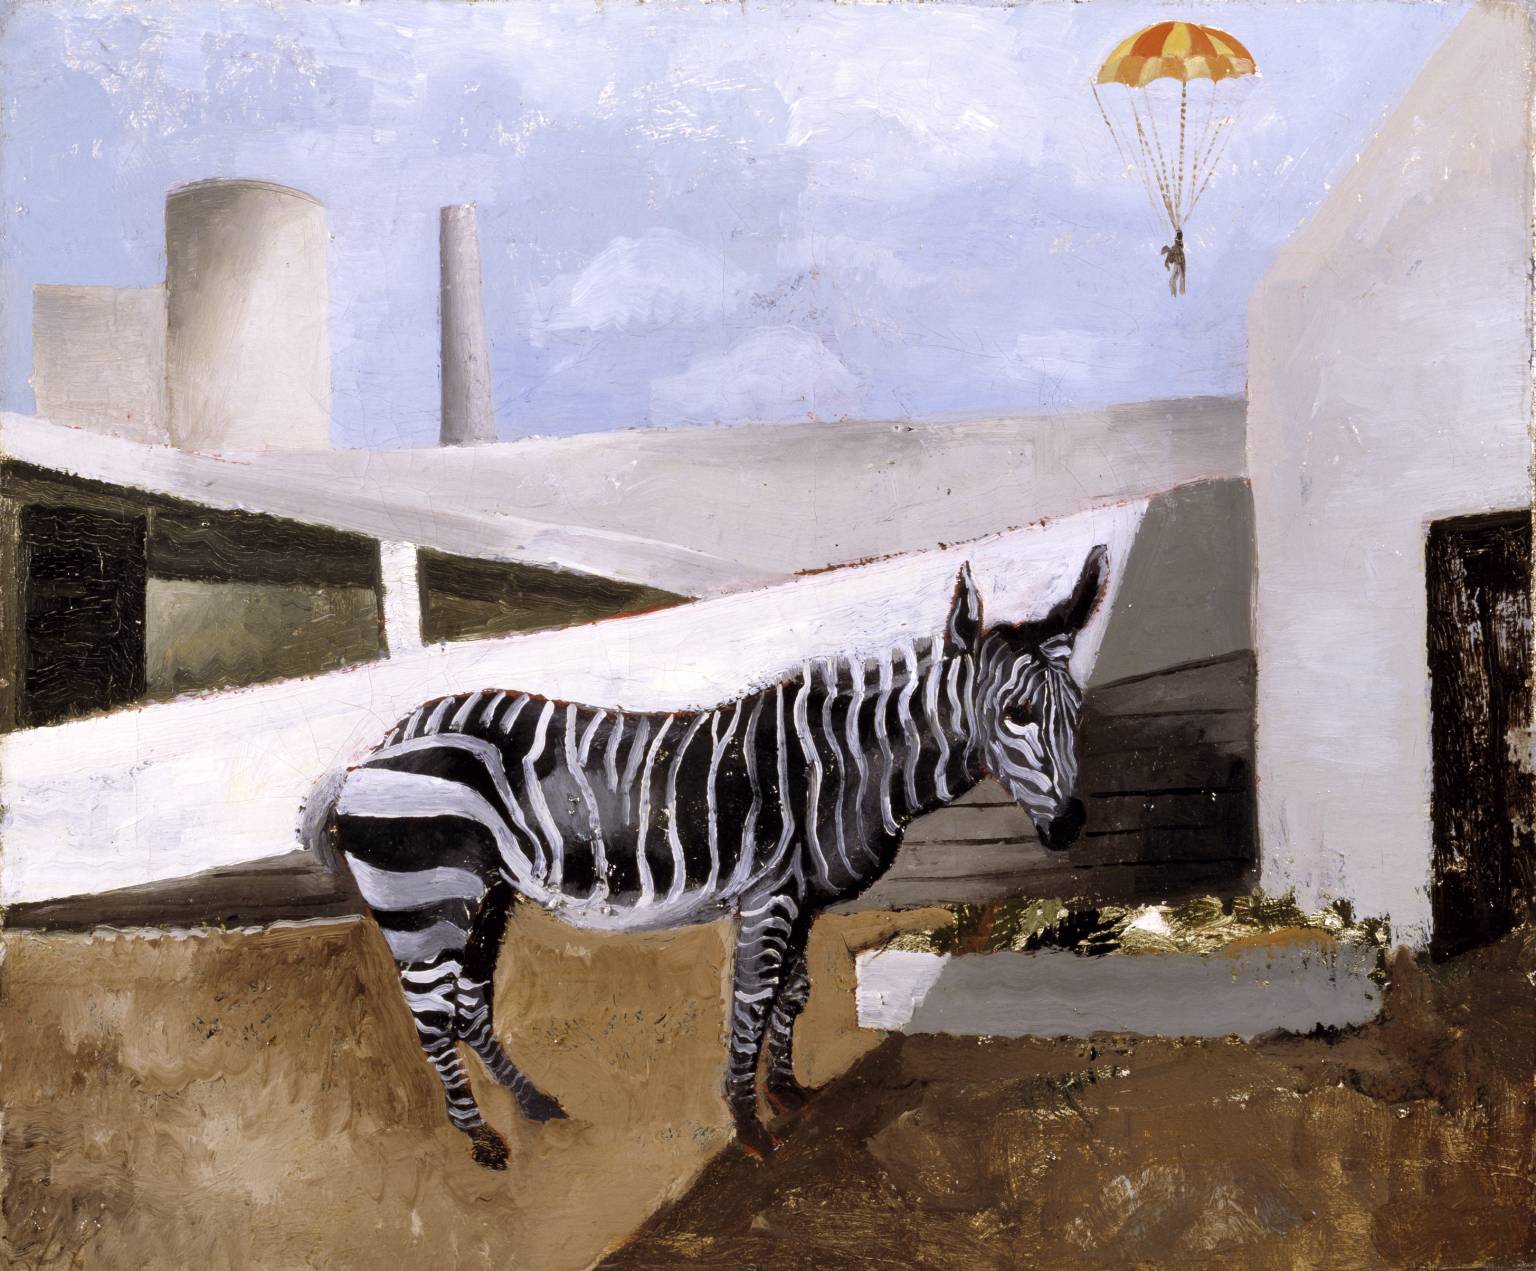 Zebra and Parachute by Christopher Wood - 1930 - 45.7 × 55.9 cm Tate Modern